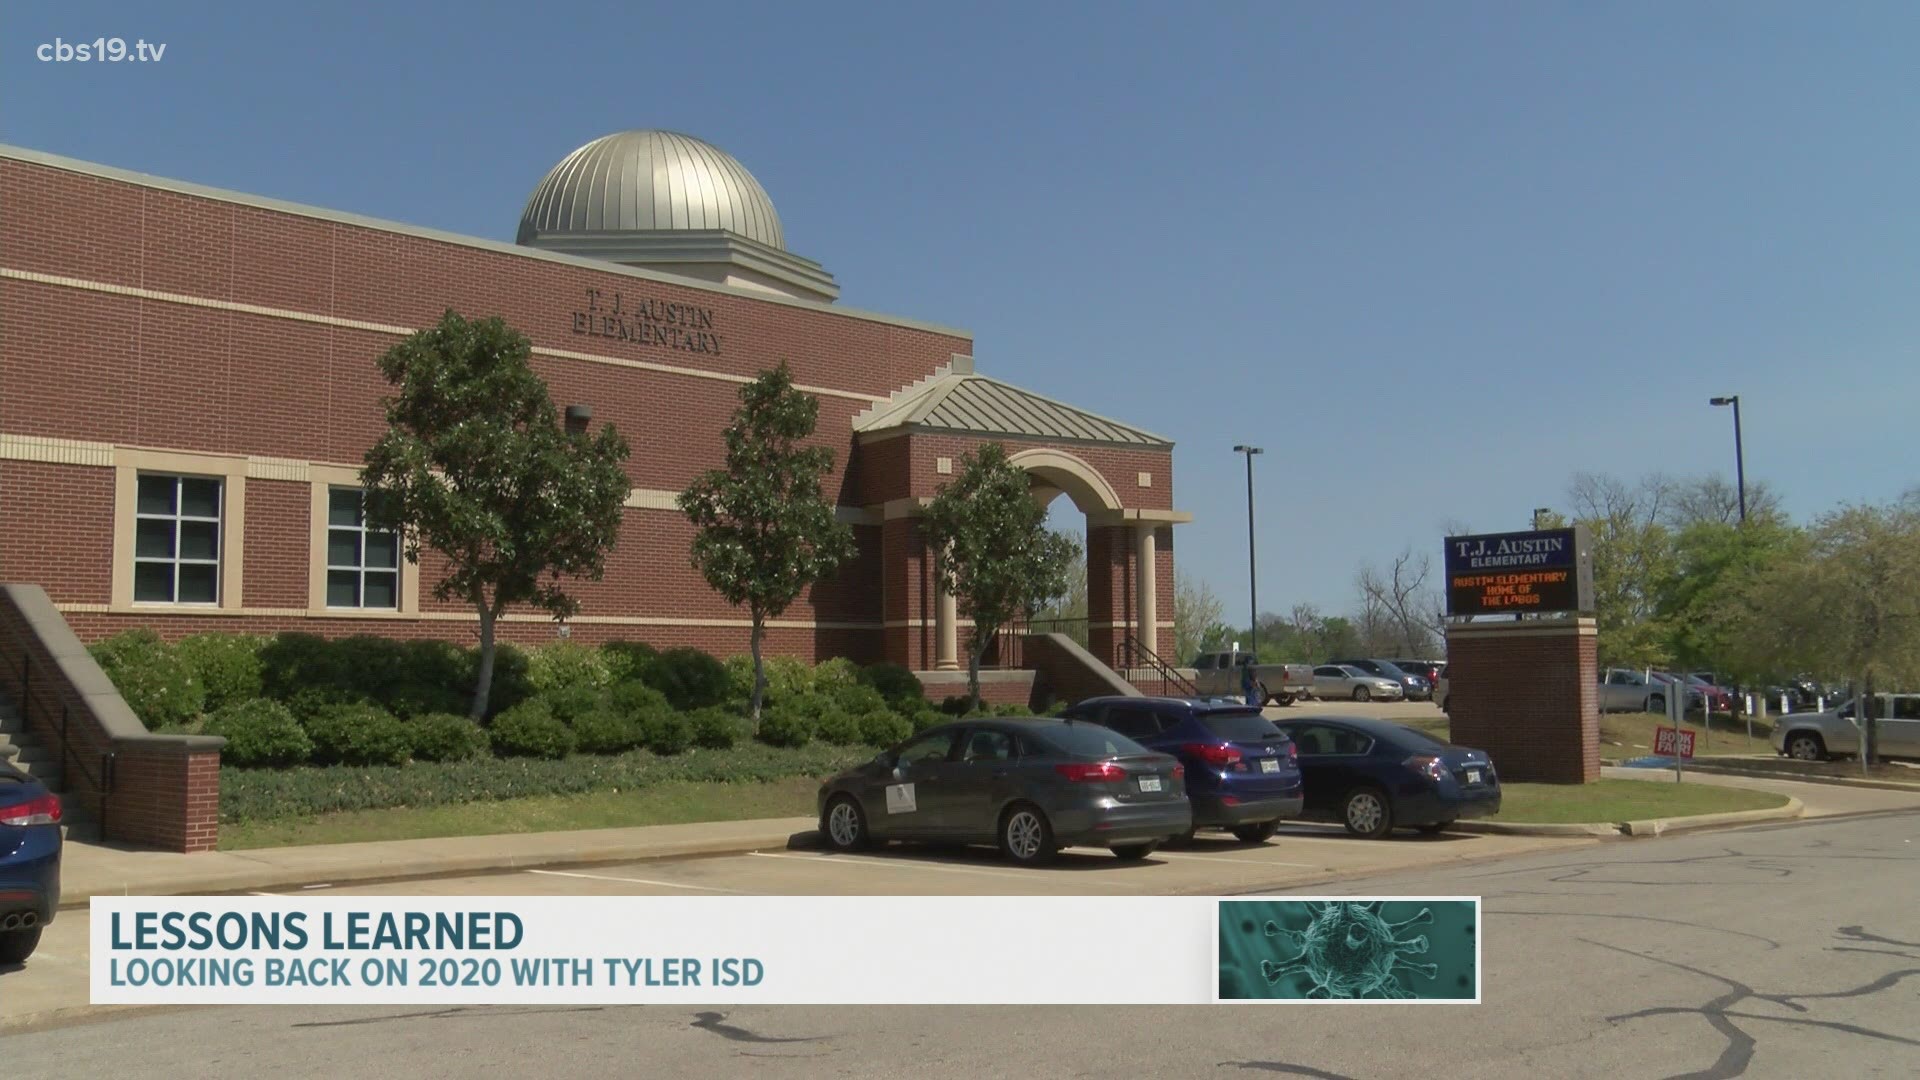 Before students get back on campus or log on for remote learning in 2021, let's look back on the biggest "Lessons Learned" at Tyler ISD during the pandemic.